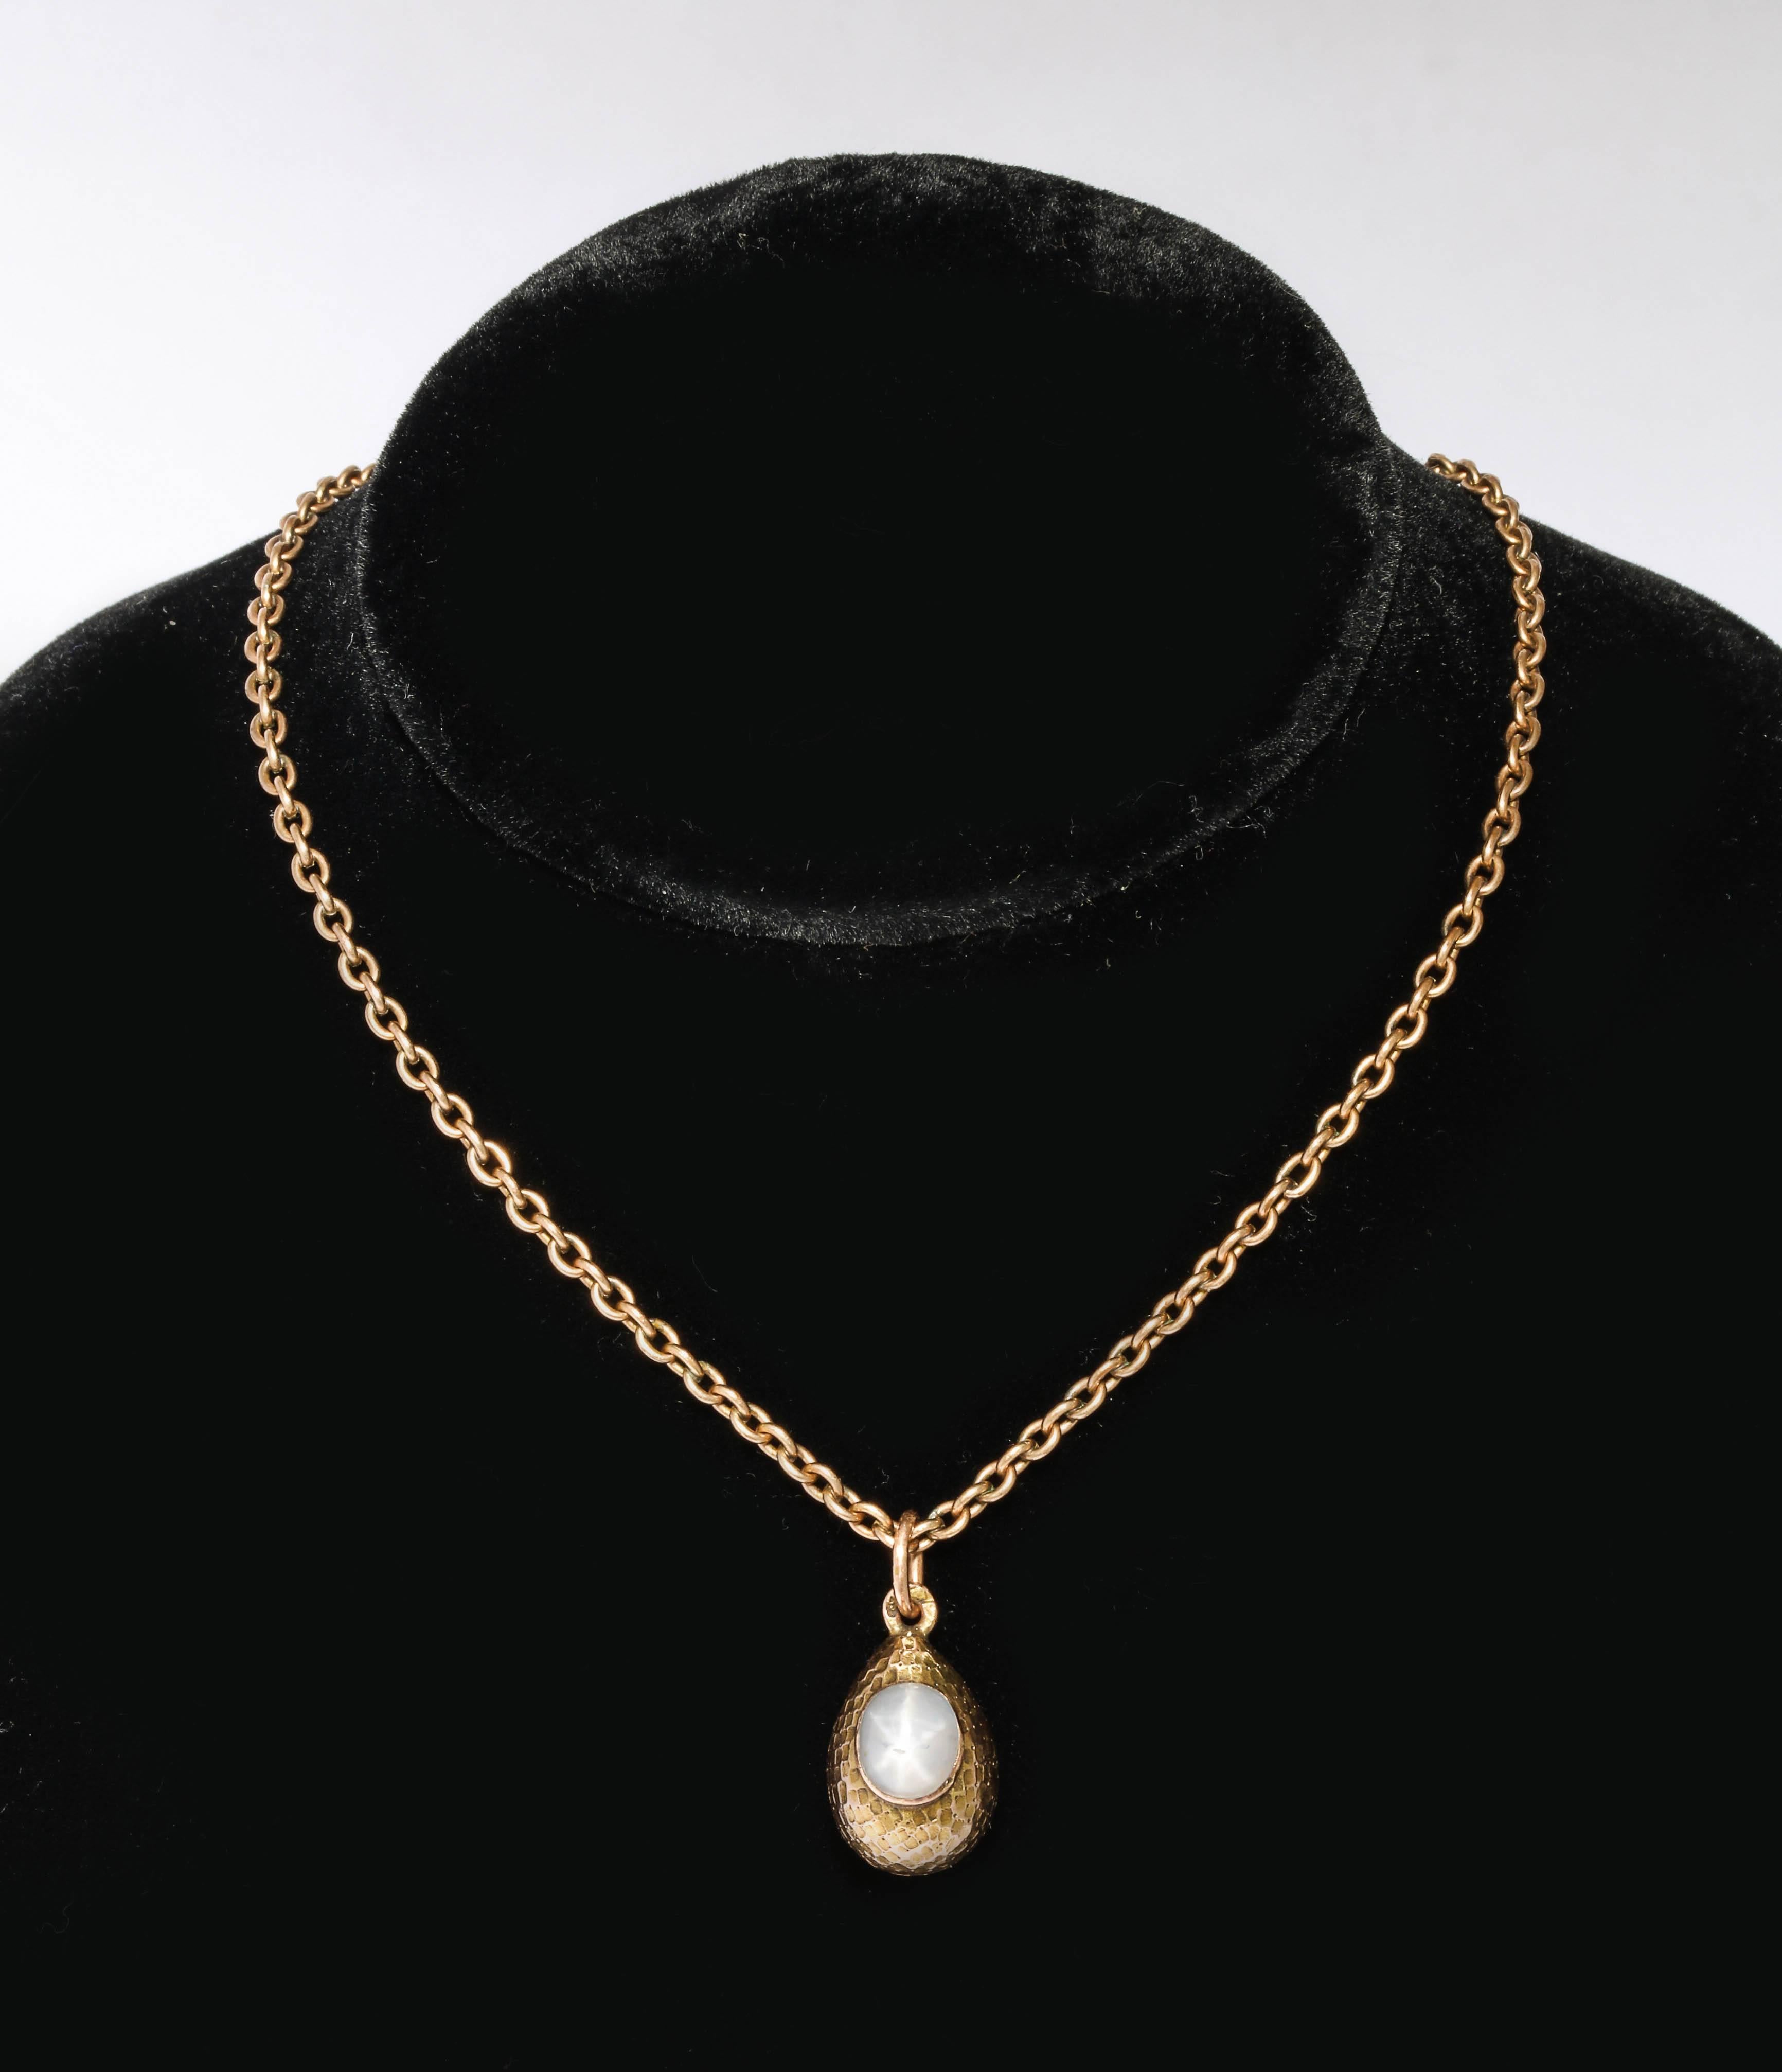 From the Romanov era, period of Tsar Nicholas II, of hammered rose gold enhanced with an oval high-cut sugarloaf cabochon star sapphire weighing approx 3.07 cts. Completely original and fitted with a gold suspension ring. Chain not included. 

The